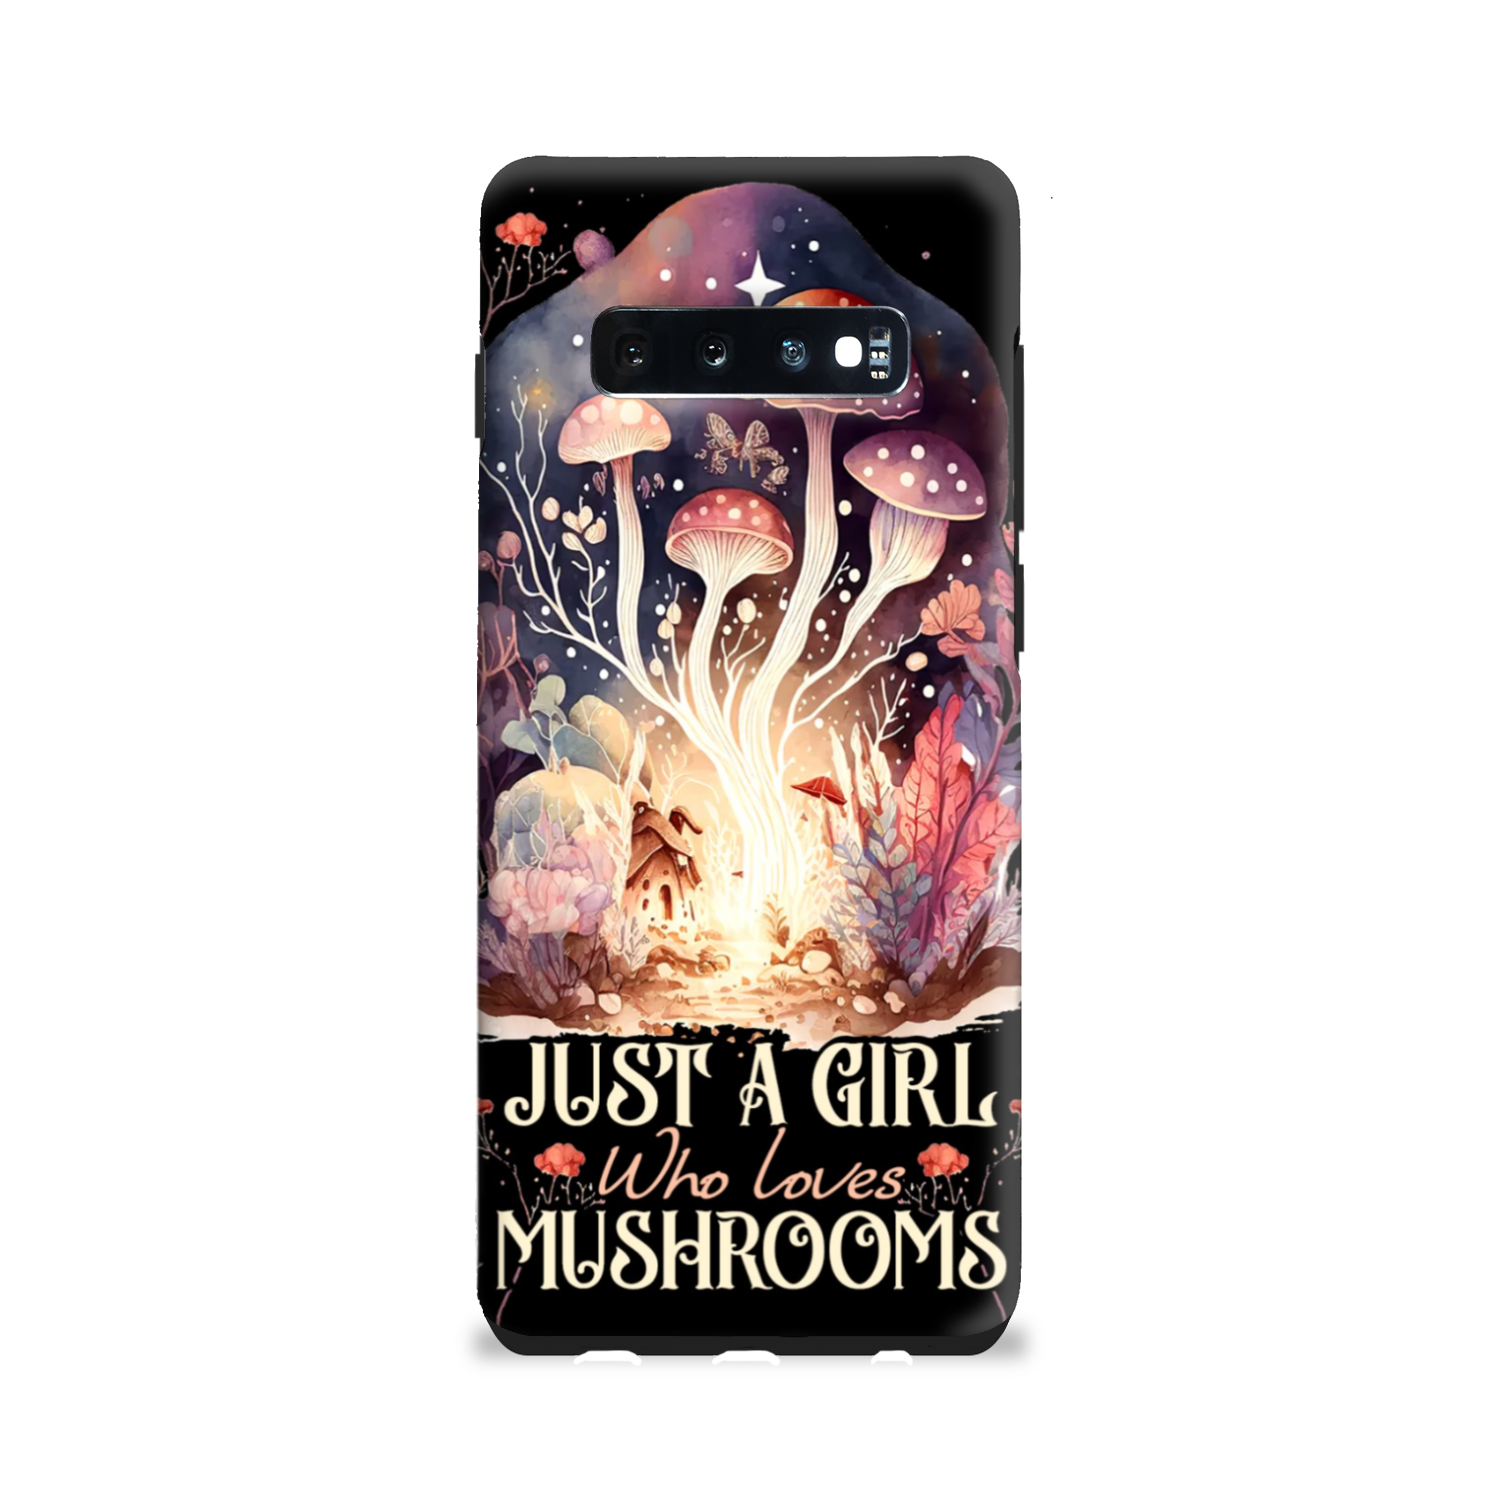 JUST A GIRL WHO LOVES MUSHROOMS PHONE CASE - TY1602231